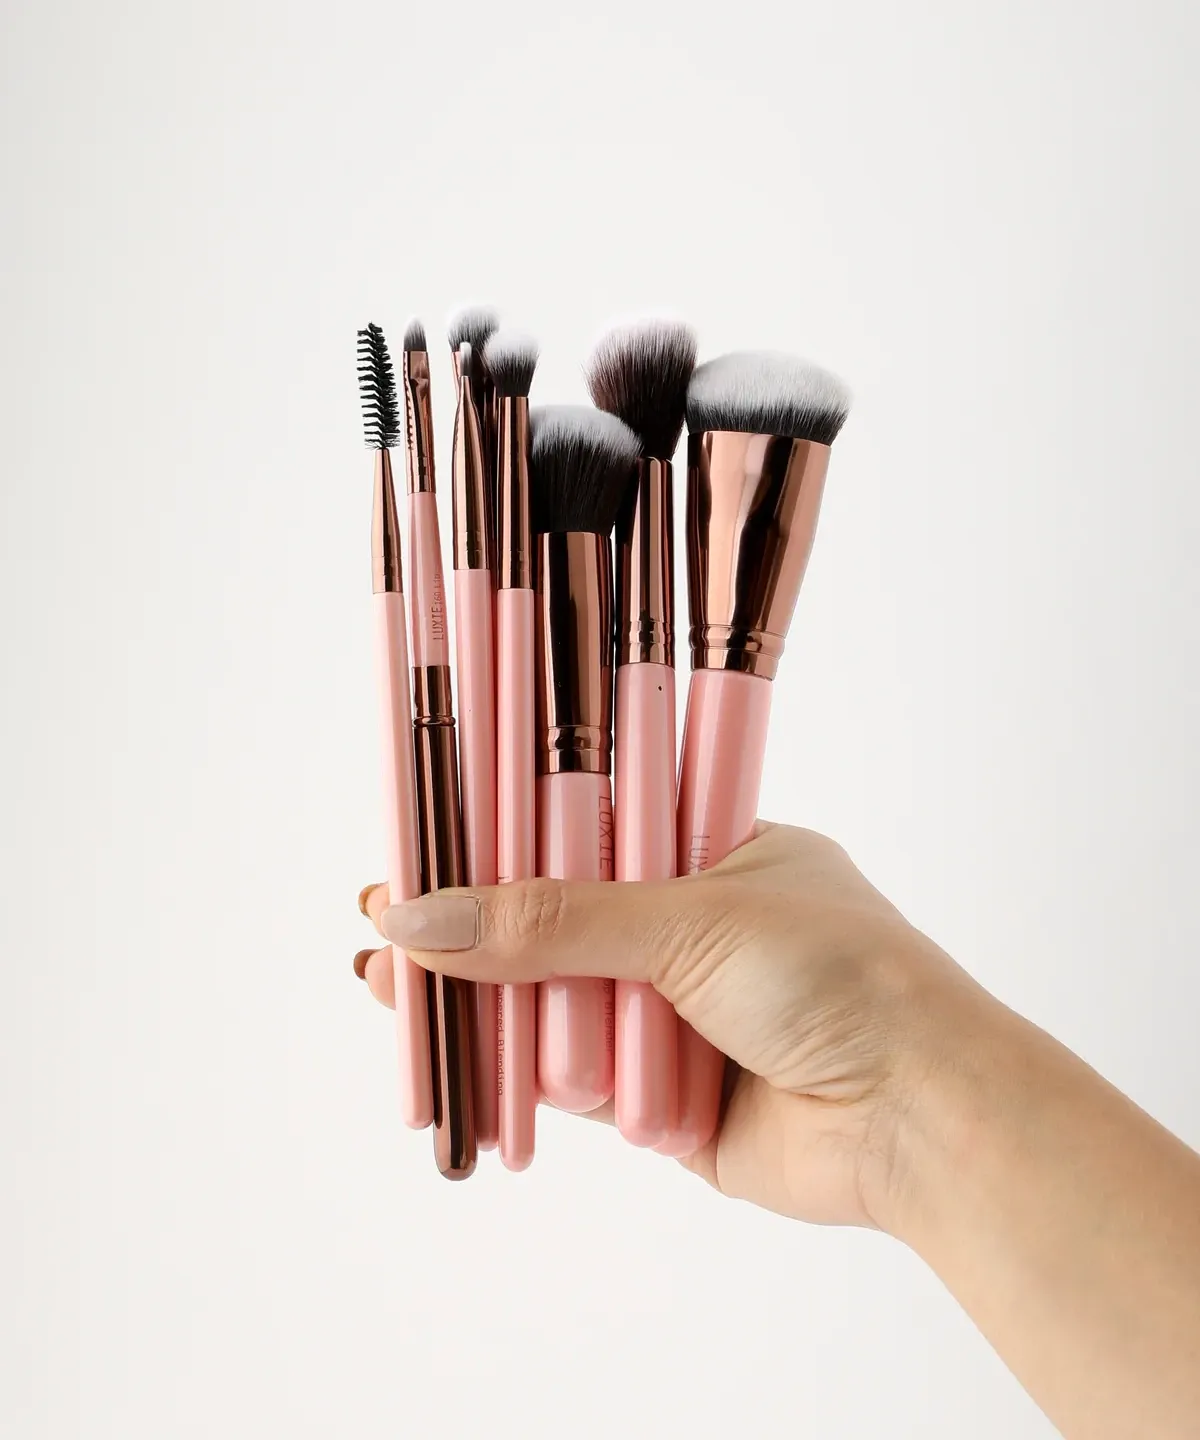 LUXIE Complete Face Brush Set - Rose Gold ($80)